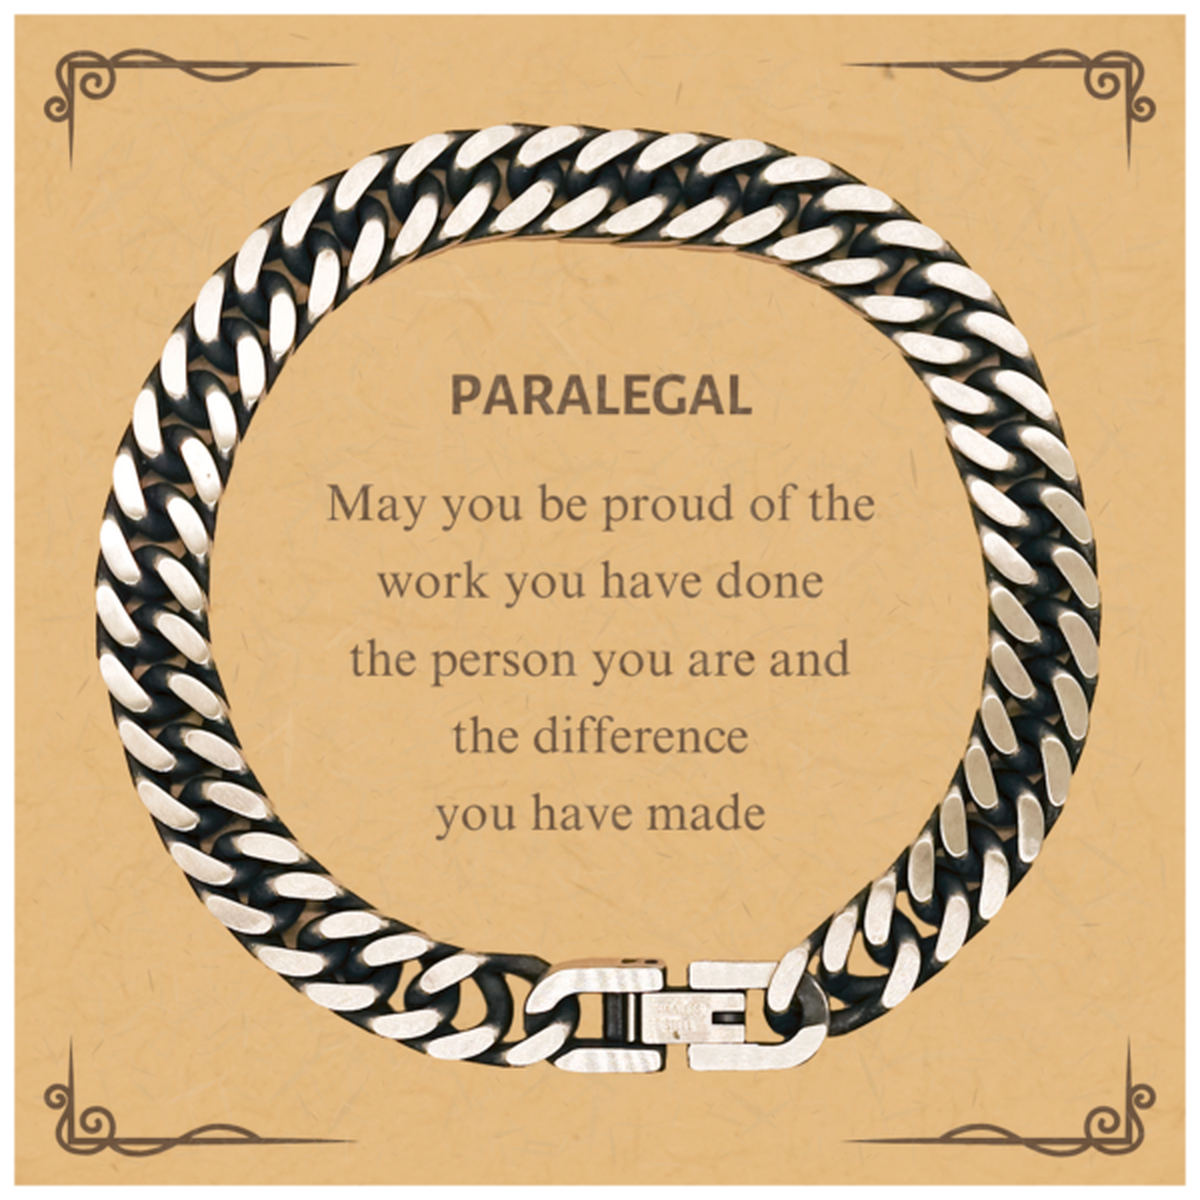 Paralegal May you be proud of the work you have done, Retirement Paralegal Cuban Link Chain Bracelet for Colleague Appreciation Gifts Amazing for Paralegal